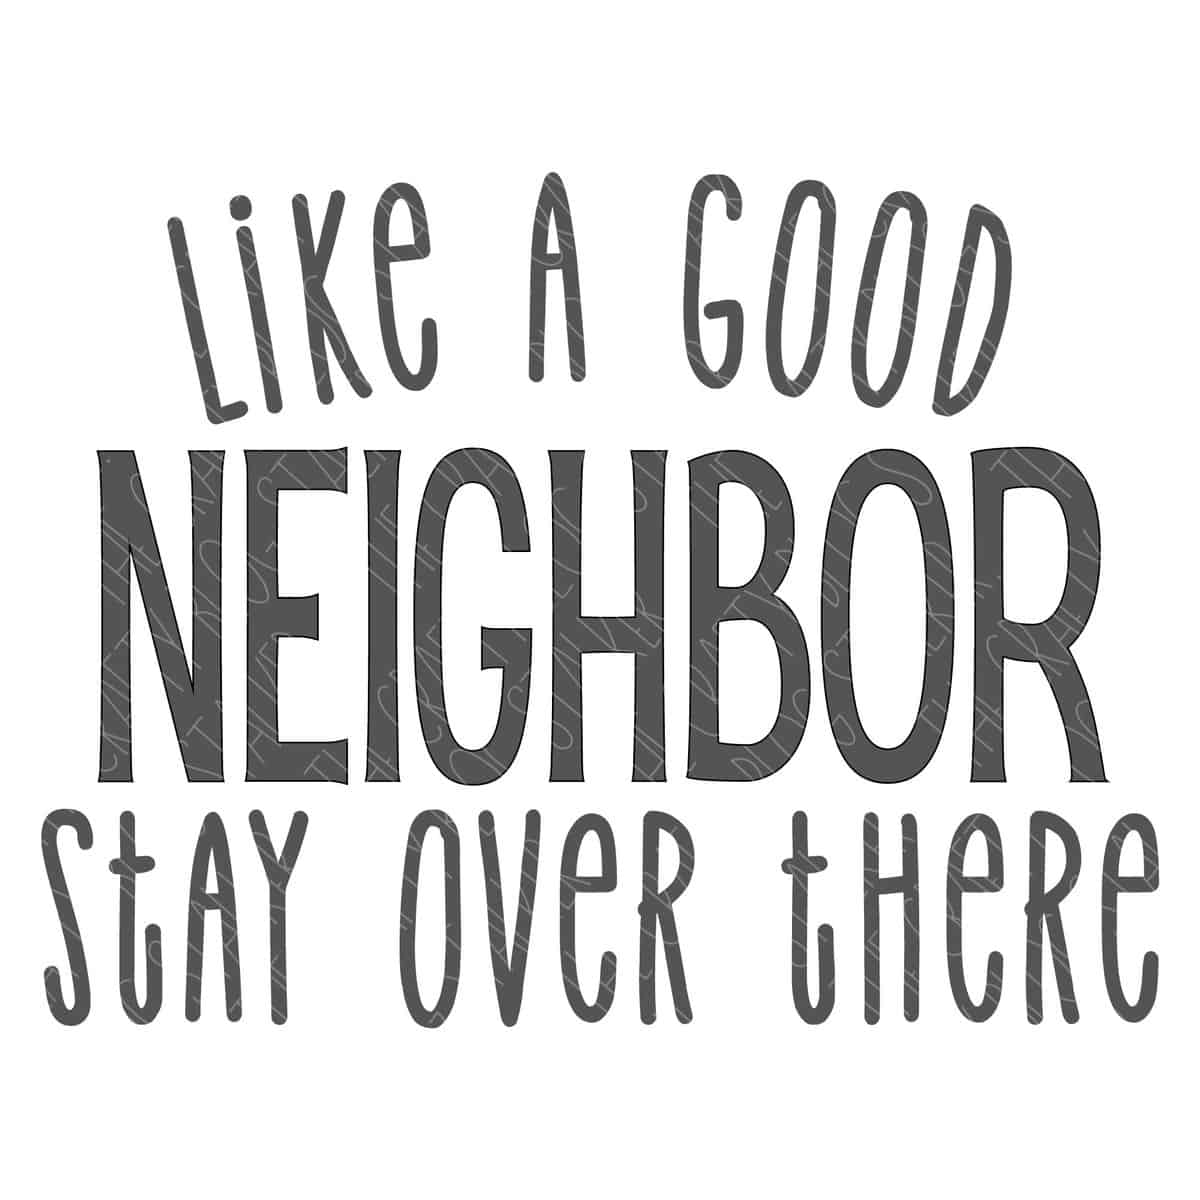 Like A Good Neighbor Stay Over There SVG	

			
		
	

		
			$3.00 – Buy Now Checkout
							
					
						
							
						
						Added to cart